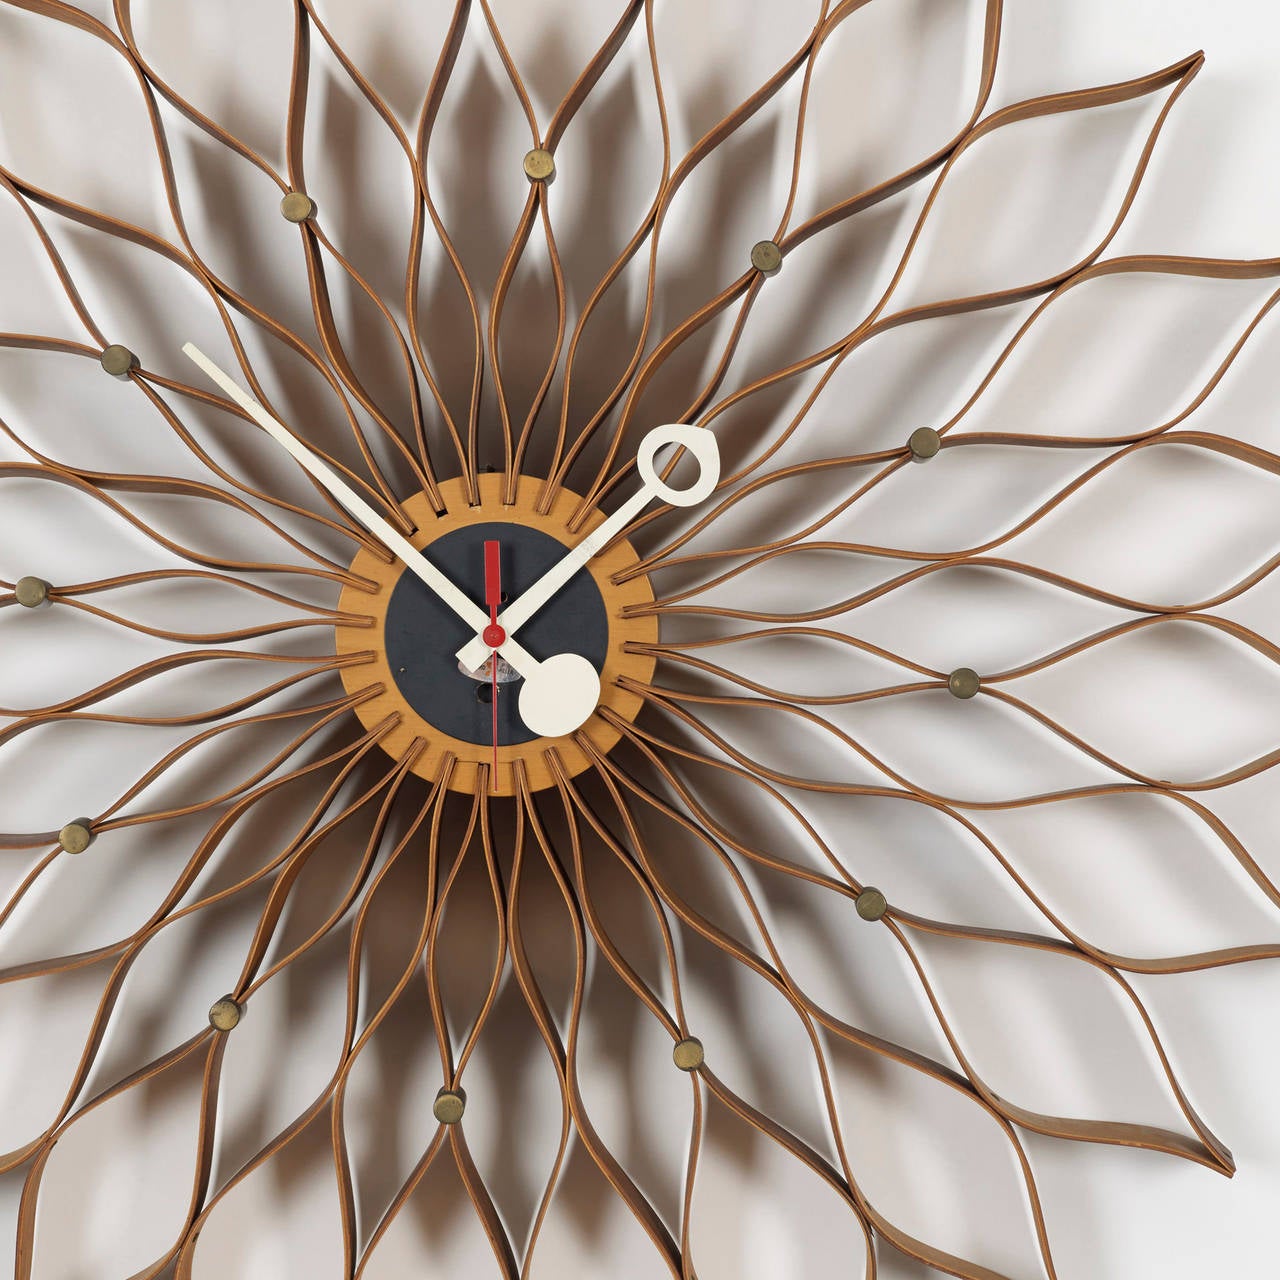 American Sunflower Clock by George Nelson & Associates for Howard Miller Clock Company